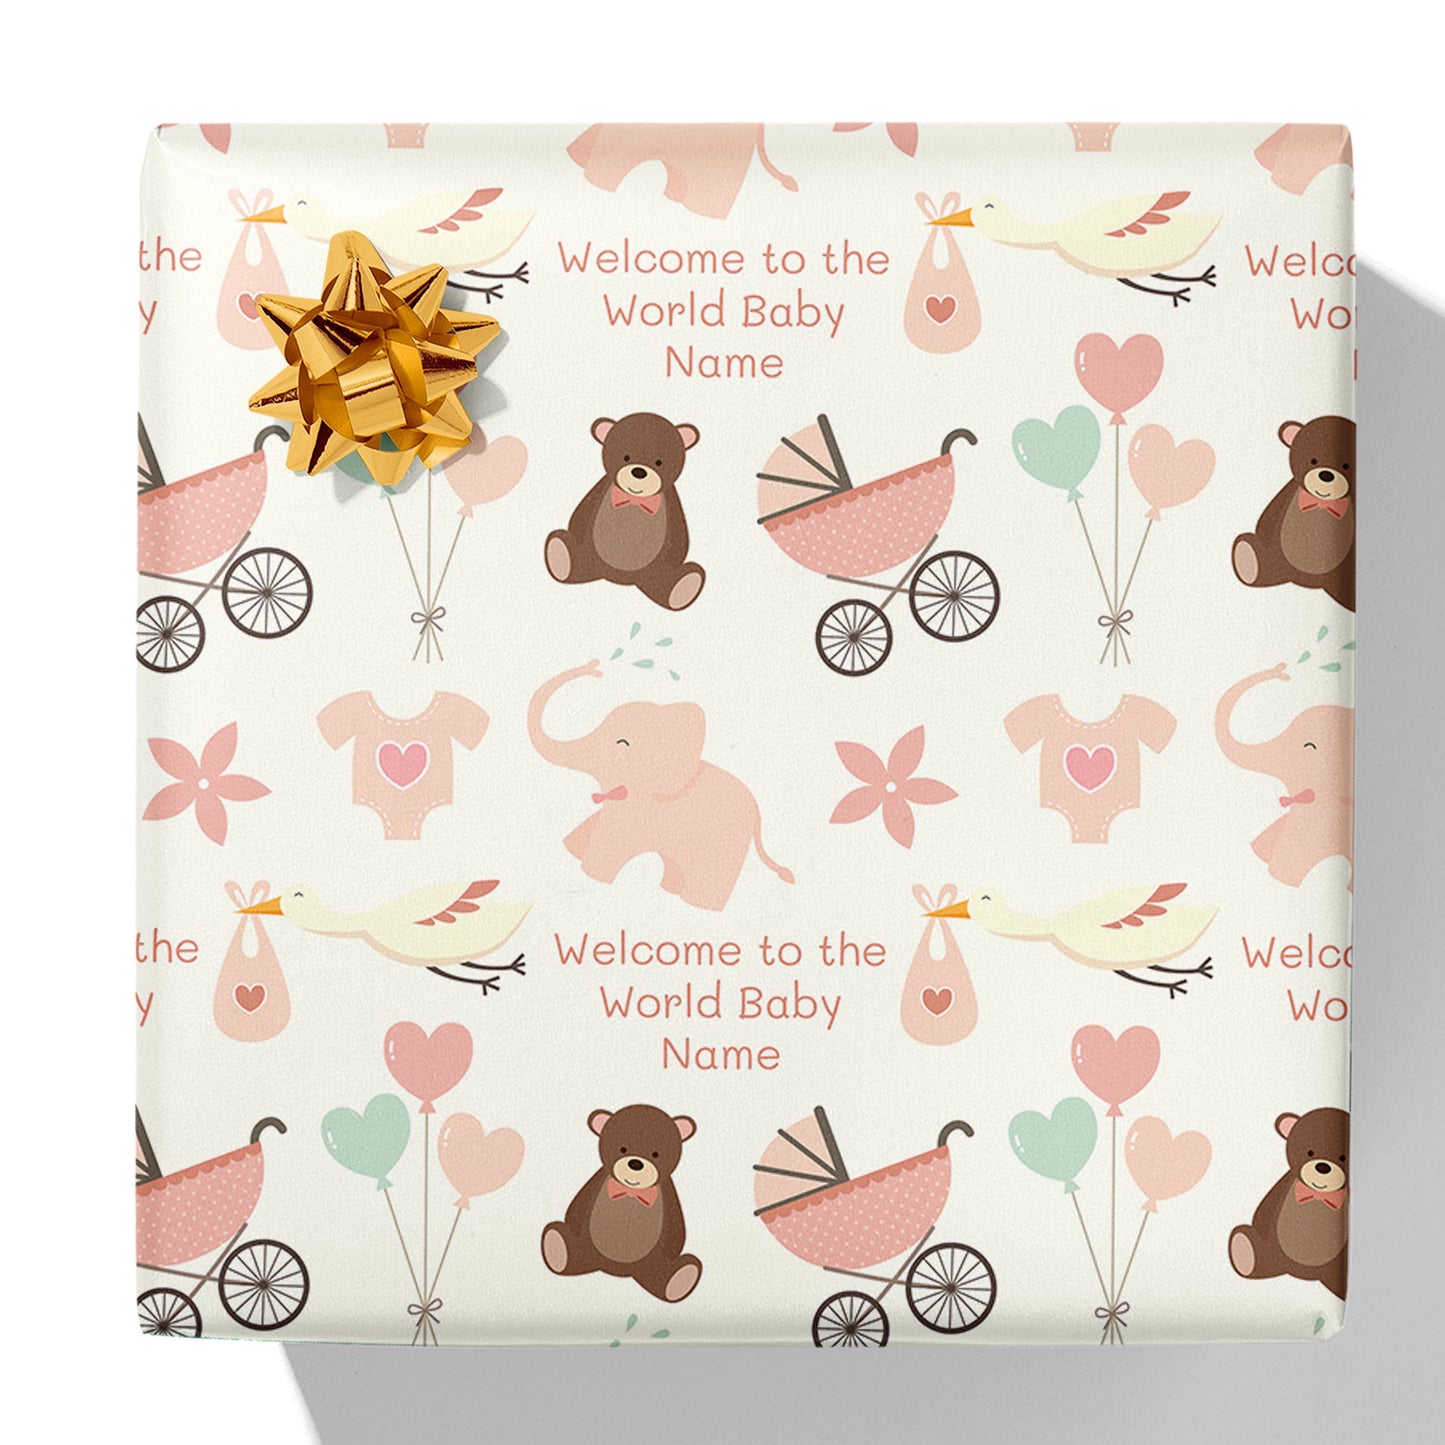 Welcome to the World Baby Name Gift Wrap